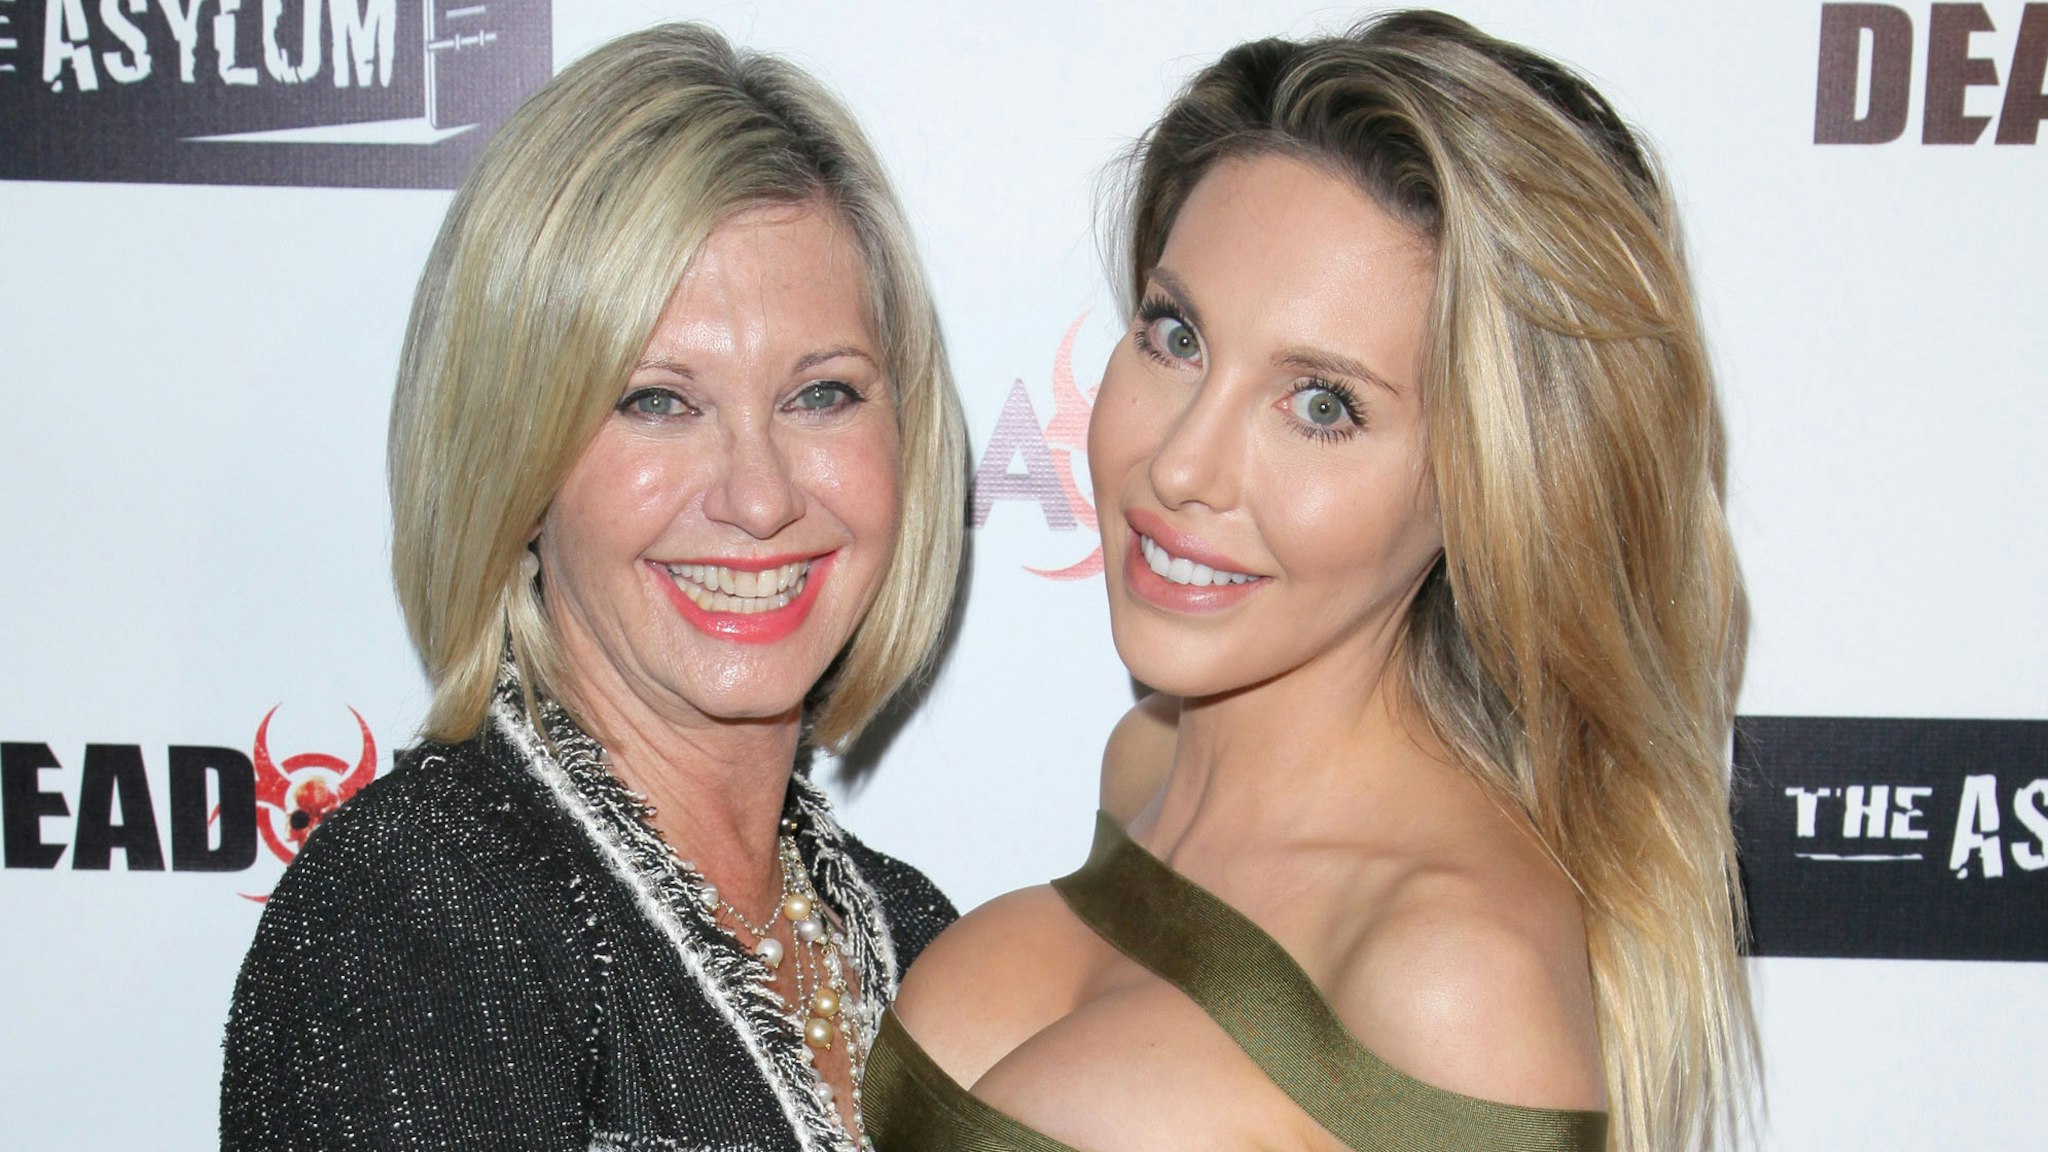 LOS ANGELES, CALIFORNIA - APRIL 01: Singer Olivia Newton-John and her daughter Chloe Lattanzi on the red carpet for the Premiere of Syfy's "Dead 7" at Harmony Gold on April 1, 2016 in Los Angeles, California.